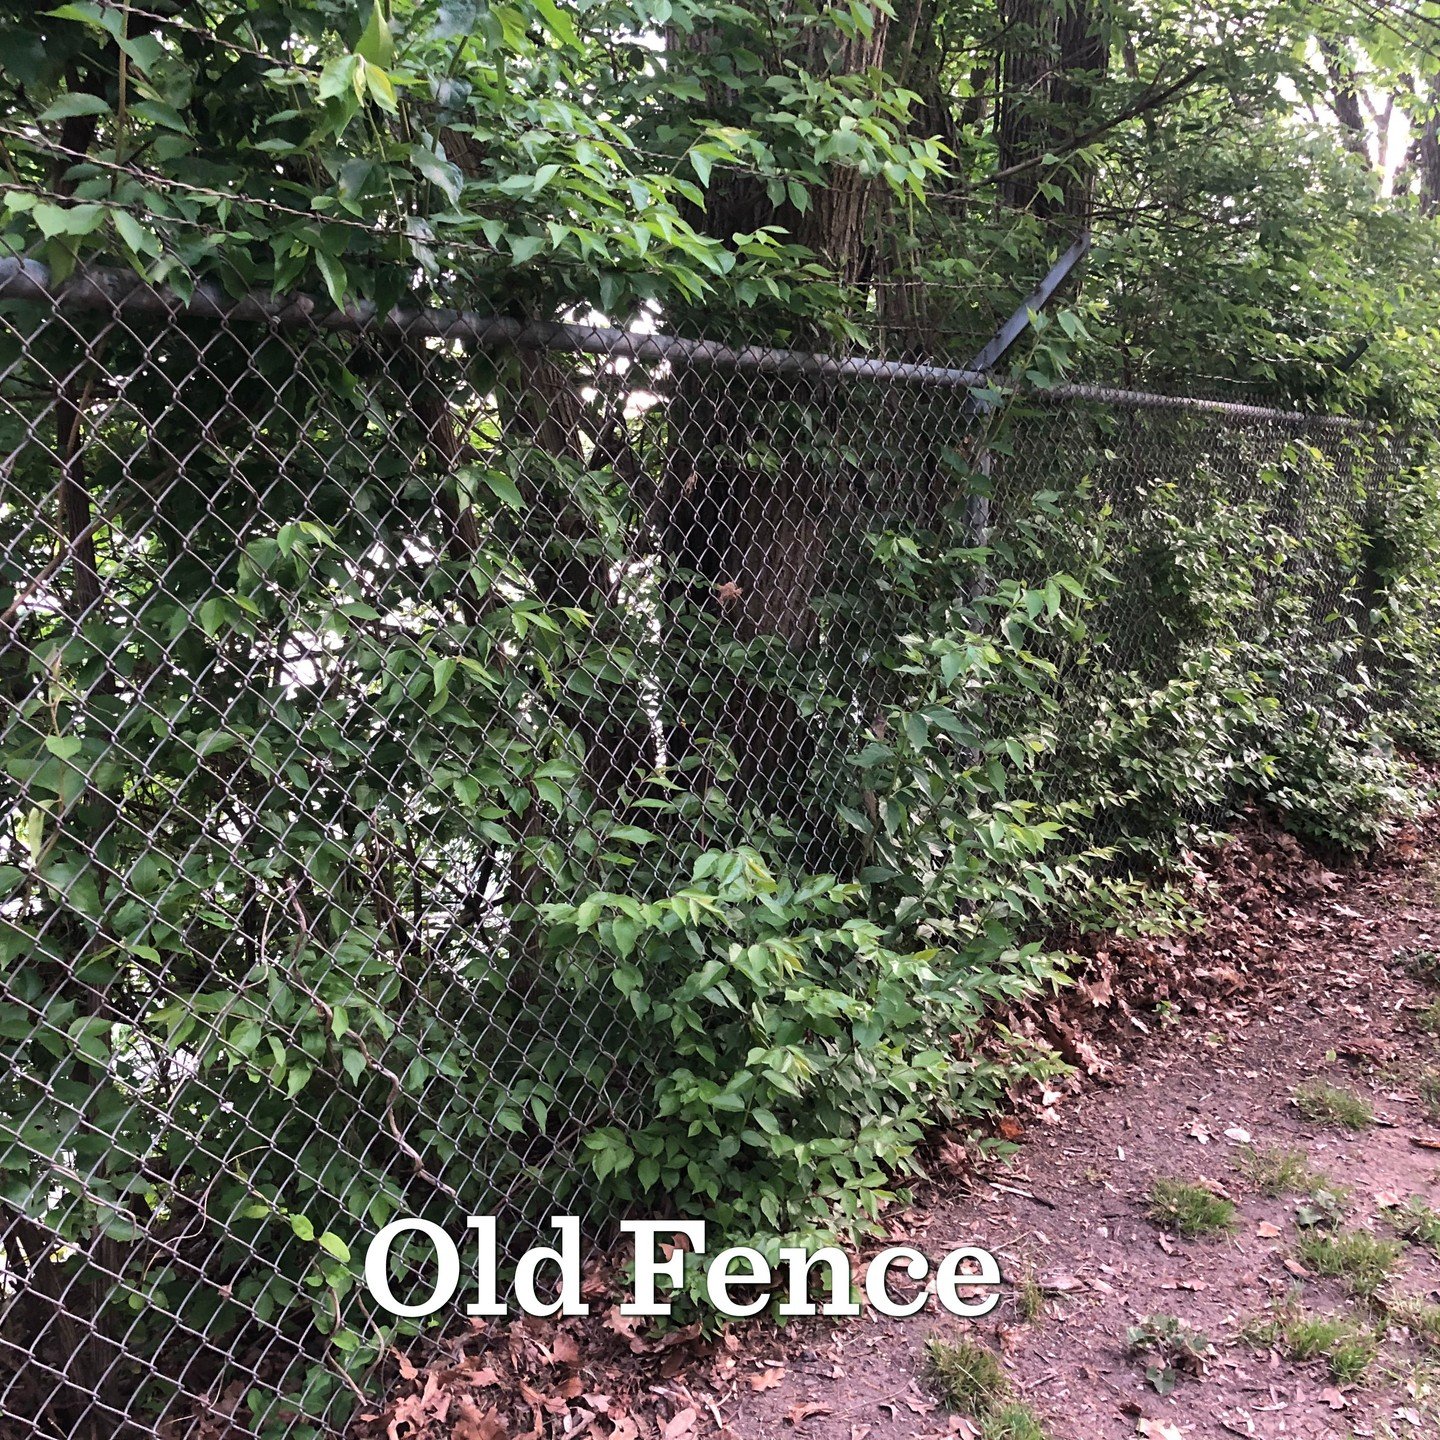 Volunteers needed - help us remove and replace our Reservoir Fence!

The existing chain-link fence has been around since the reservoir was decommissioned in the 1970's. It's high time for it to come down and be replaced with a less visible high-tensi